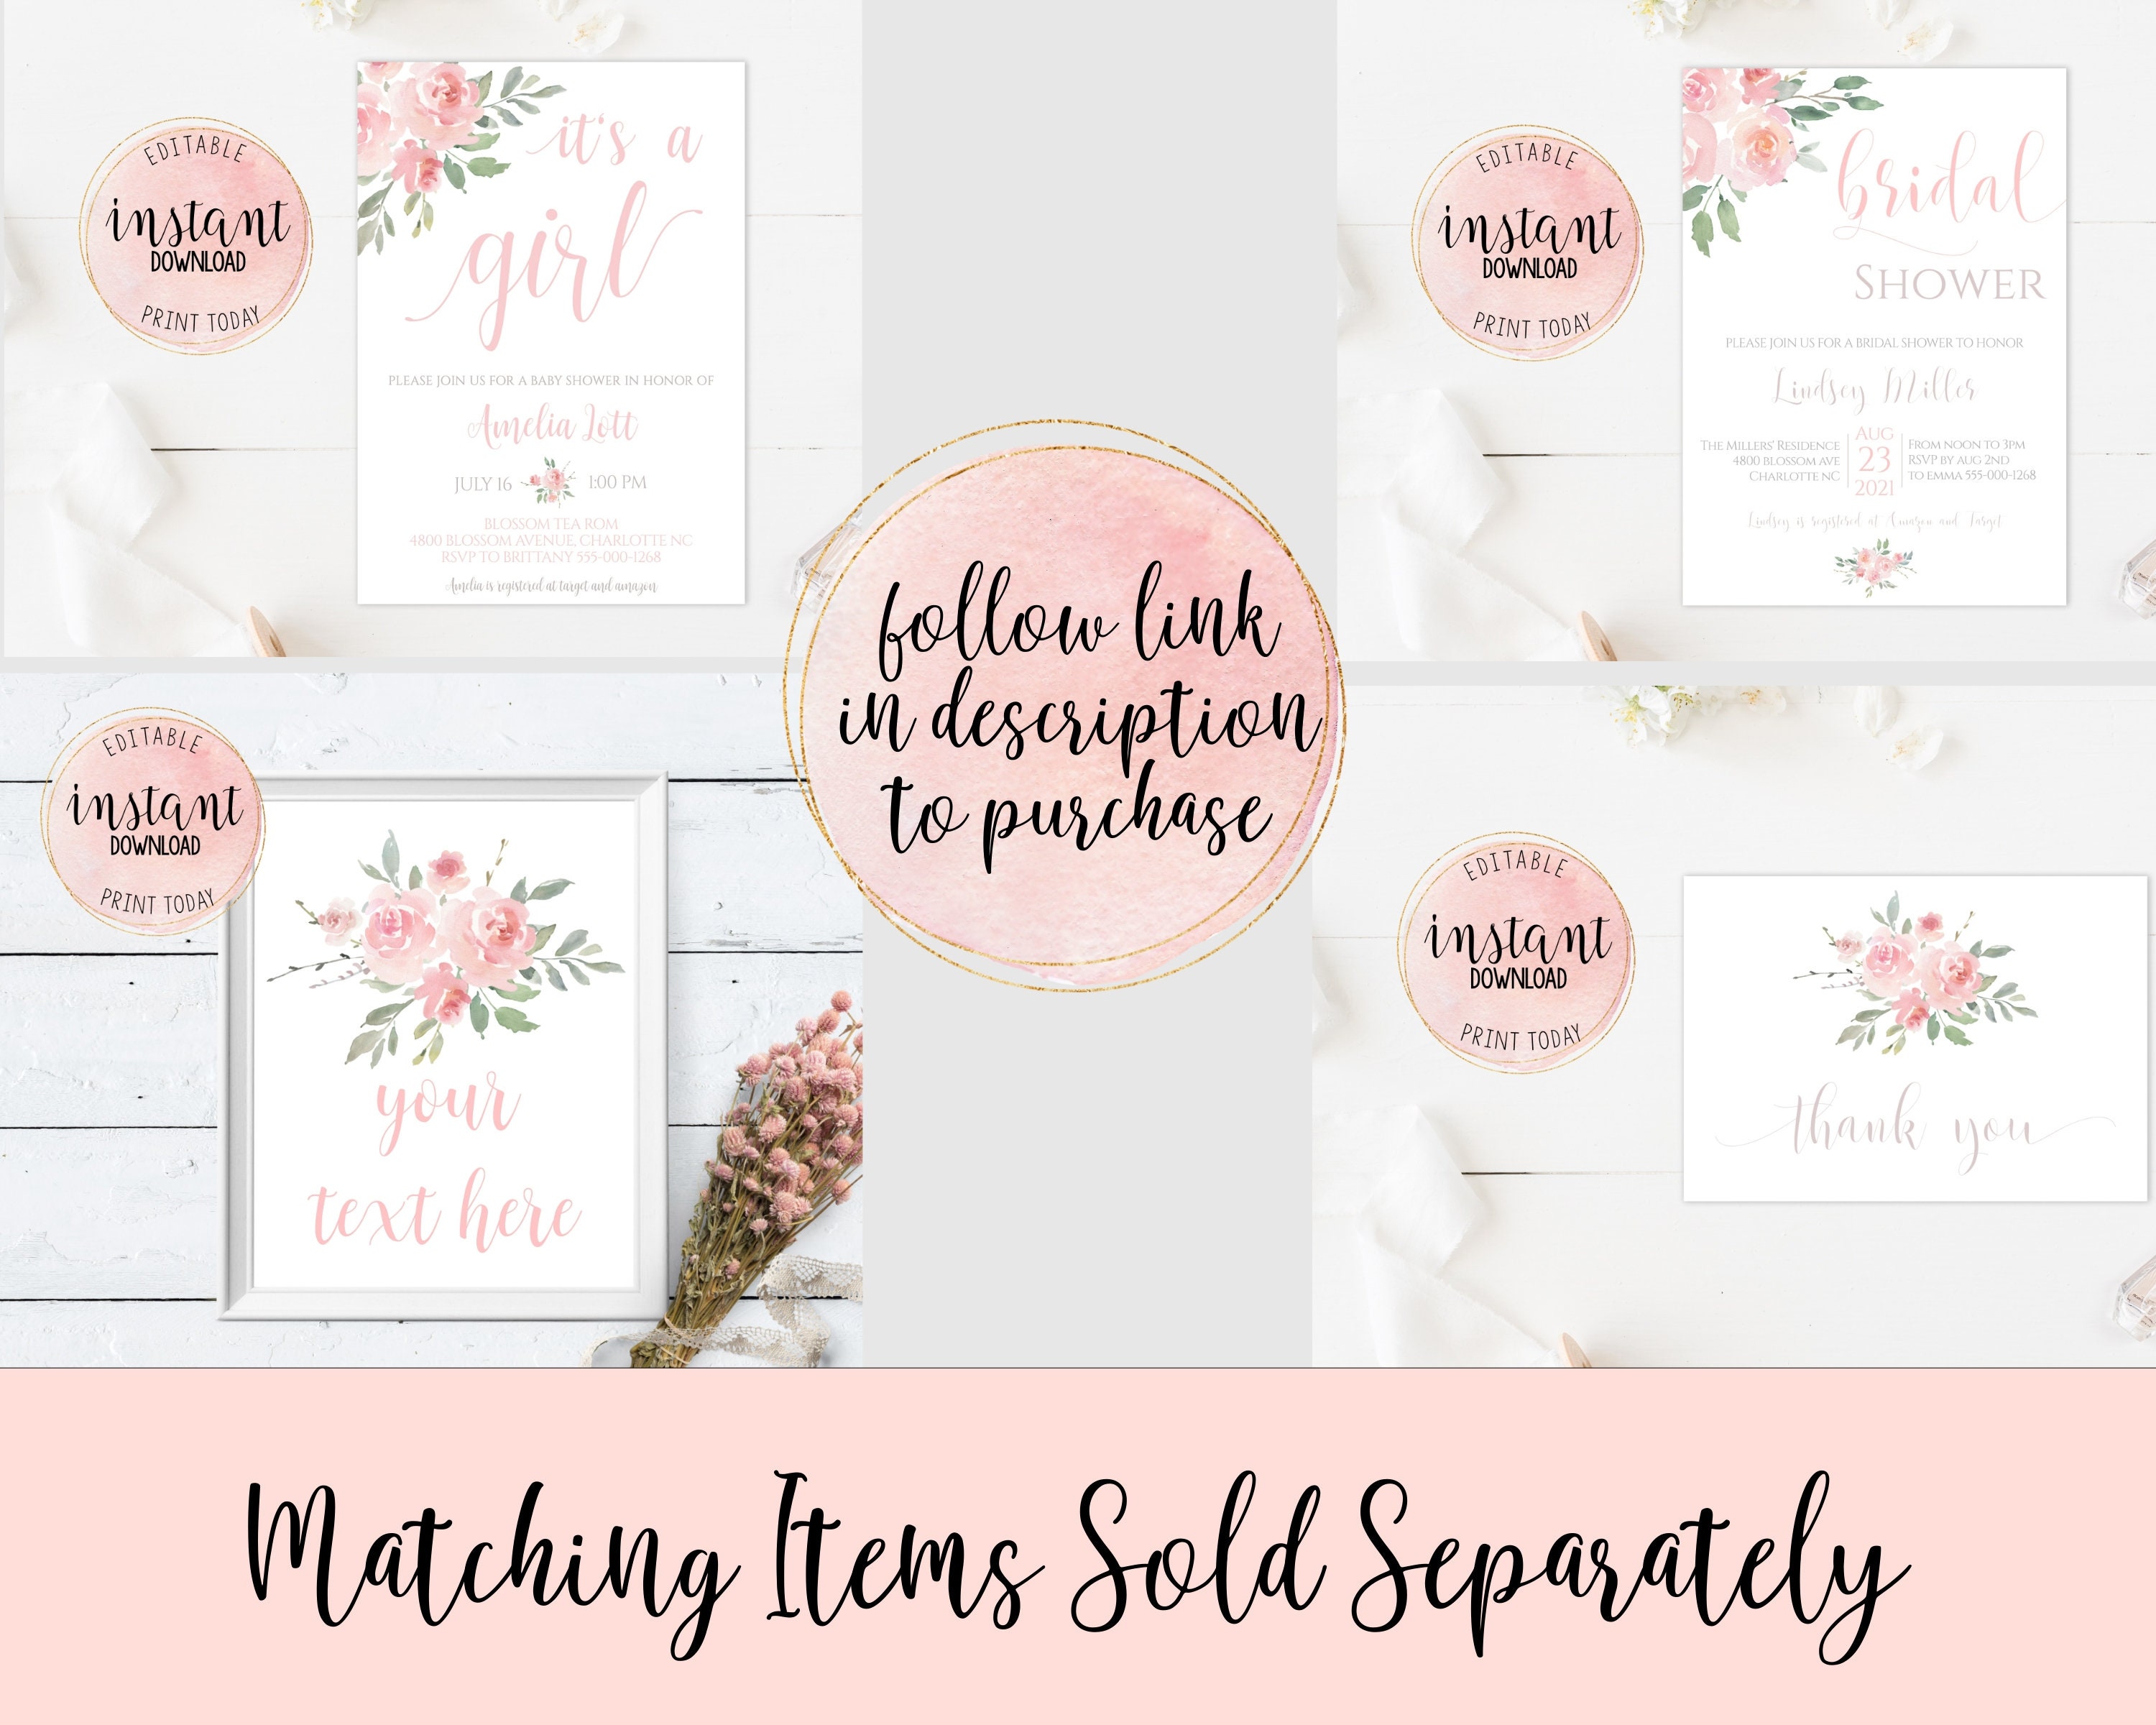 Quinn Floral Pink  Printable Mimosa Bar Sign and Juice Tags